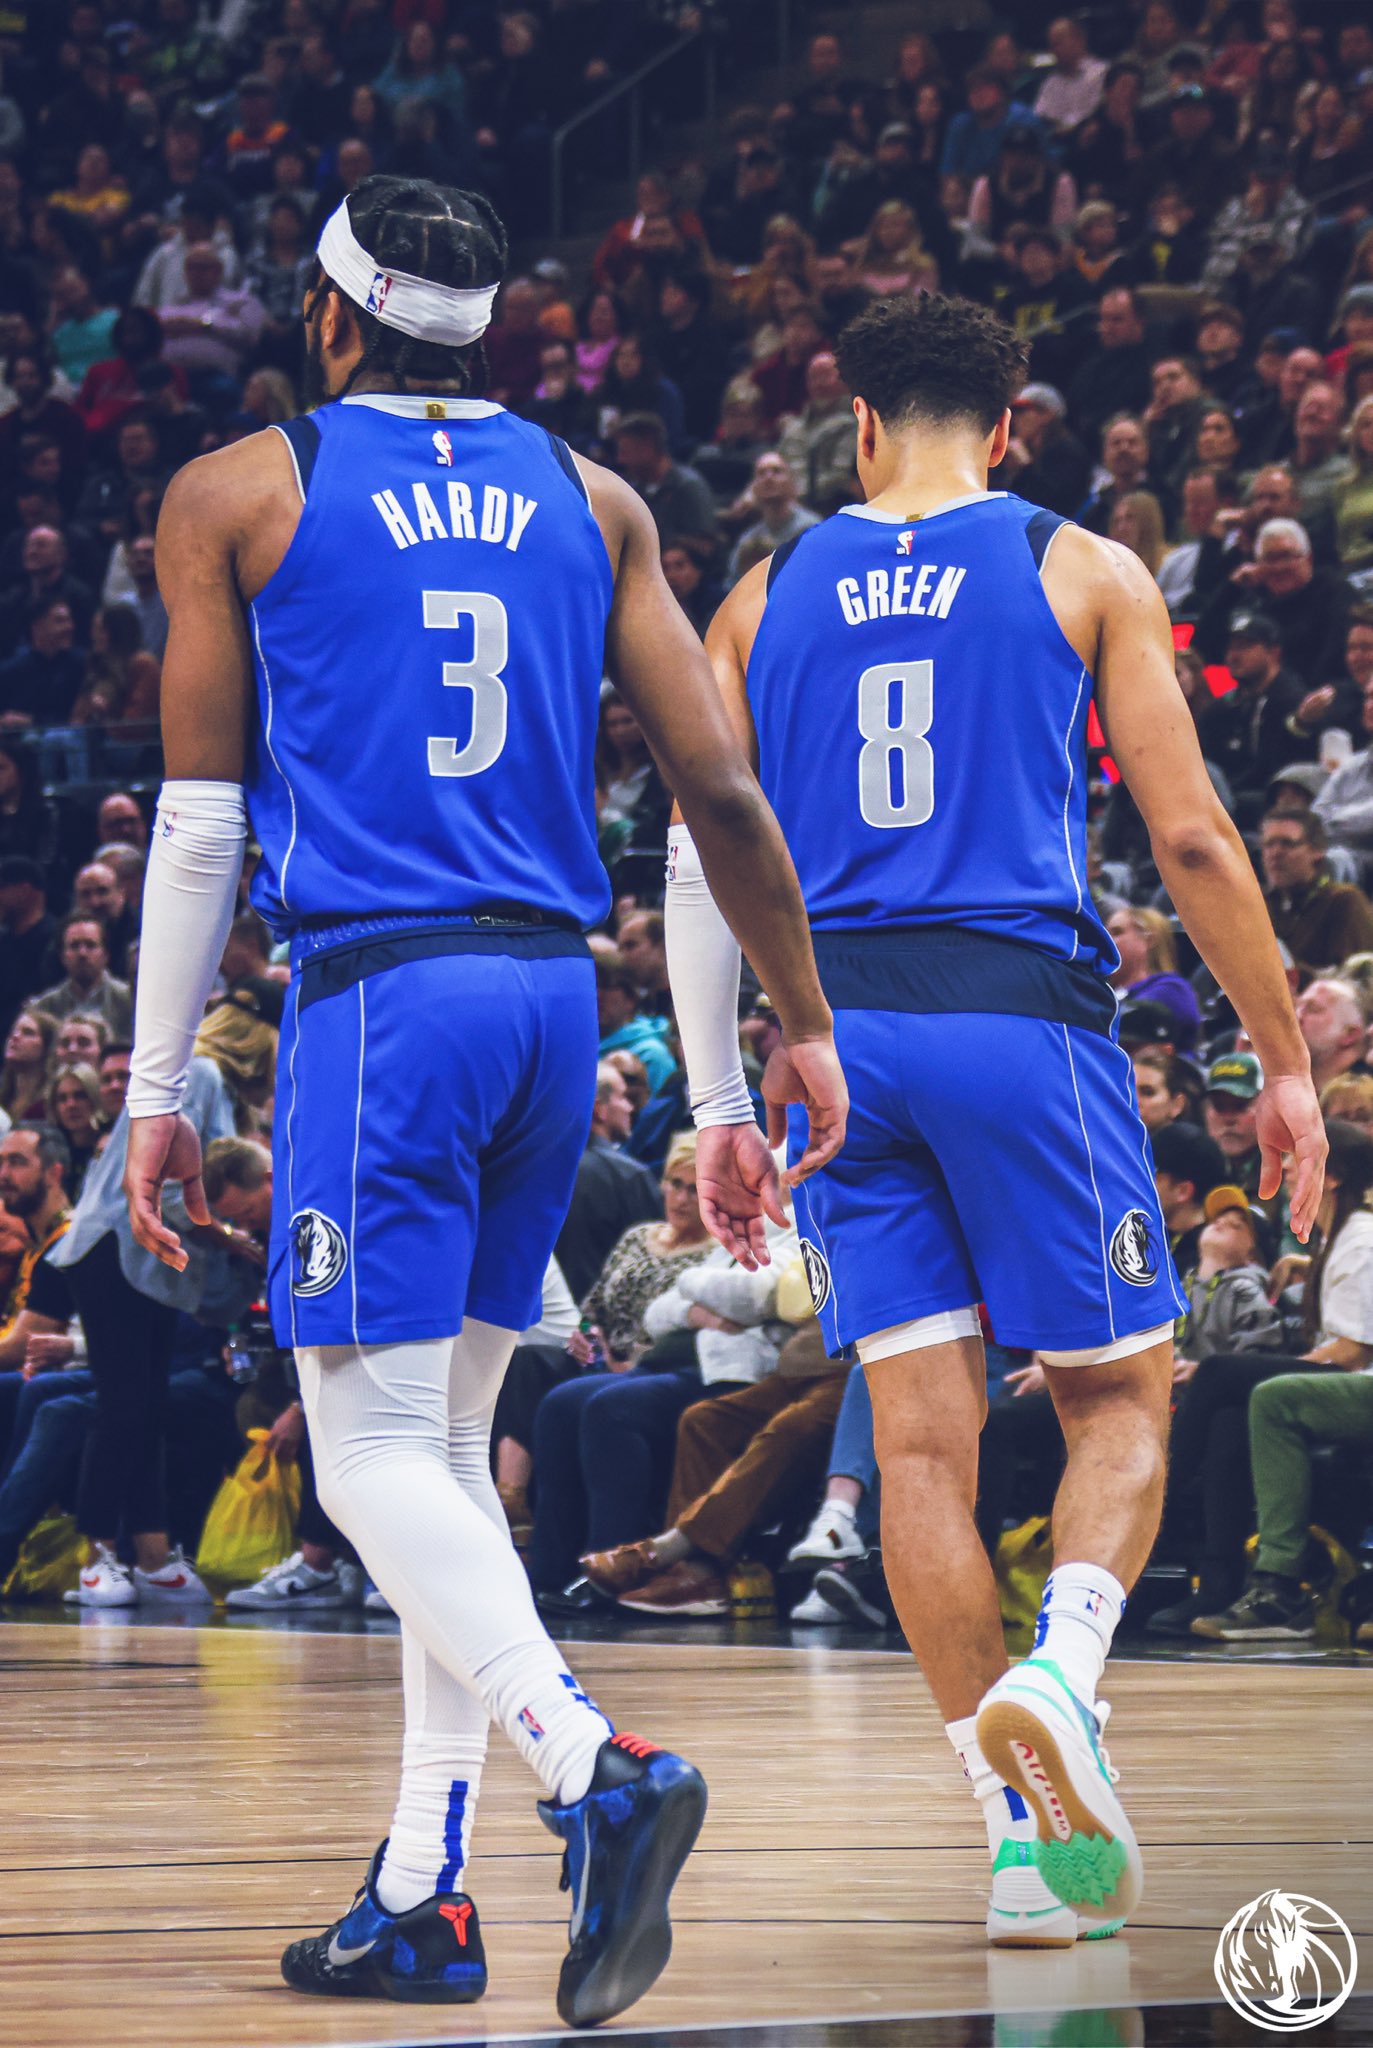 Josh Green is X-Factor in Mavs' playoff dreams with Luka Doncic